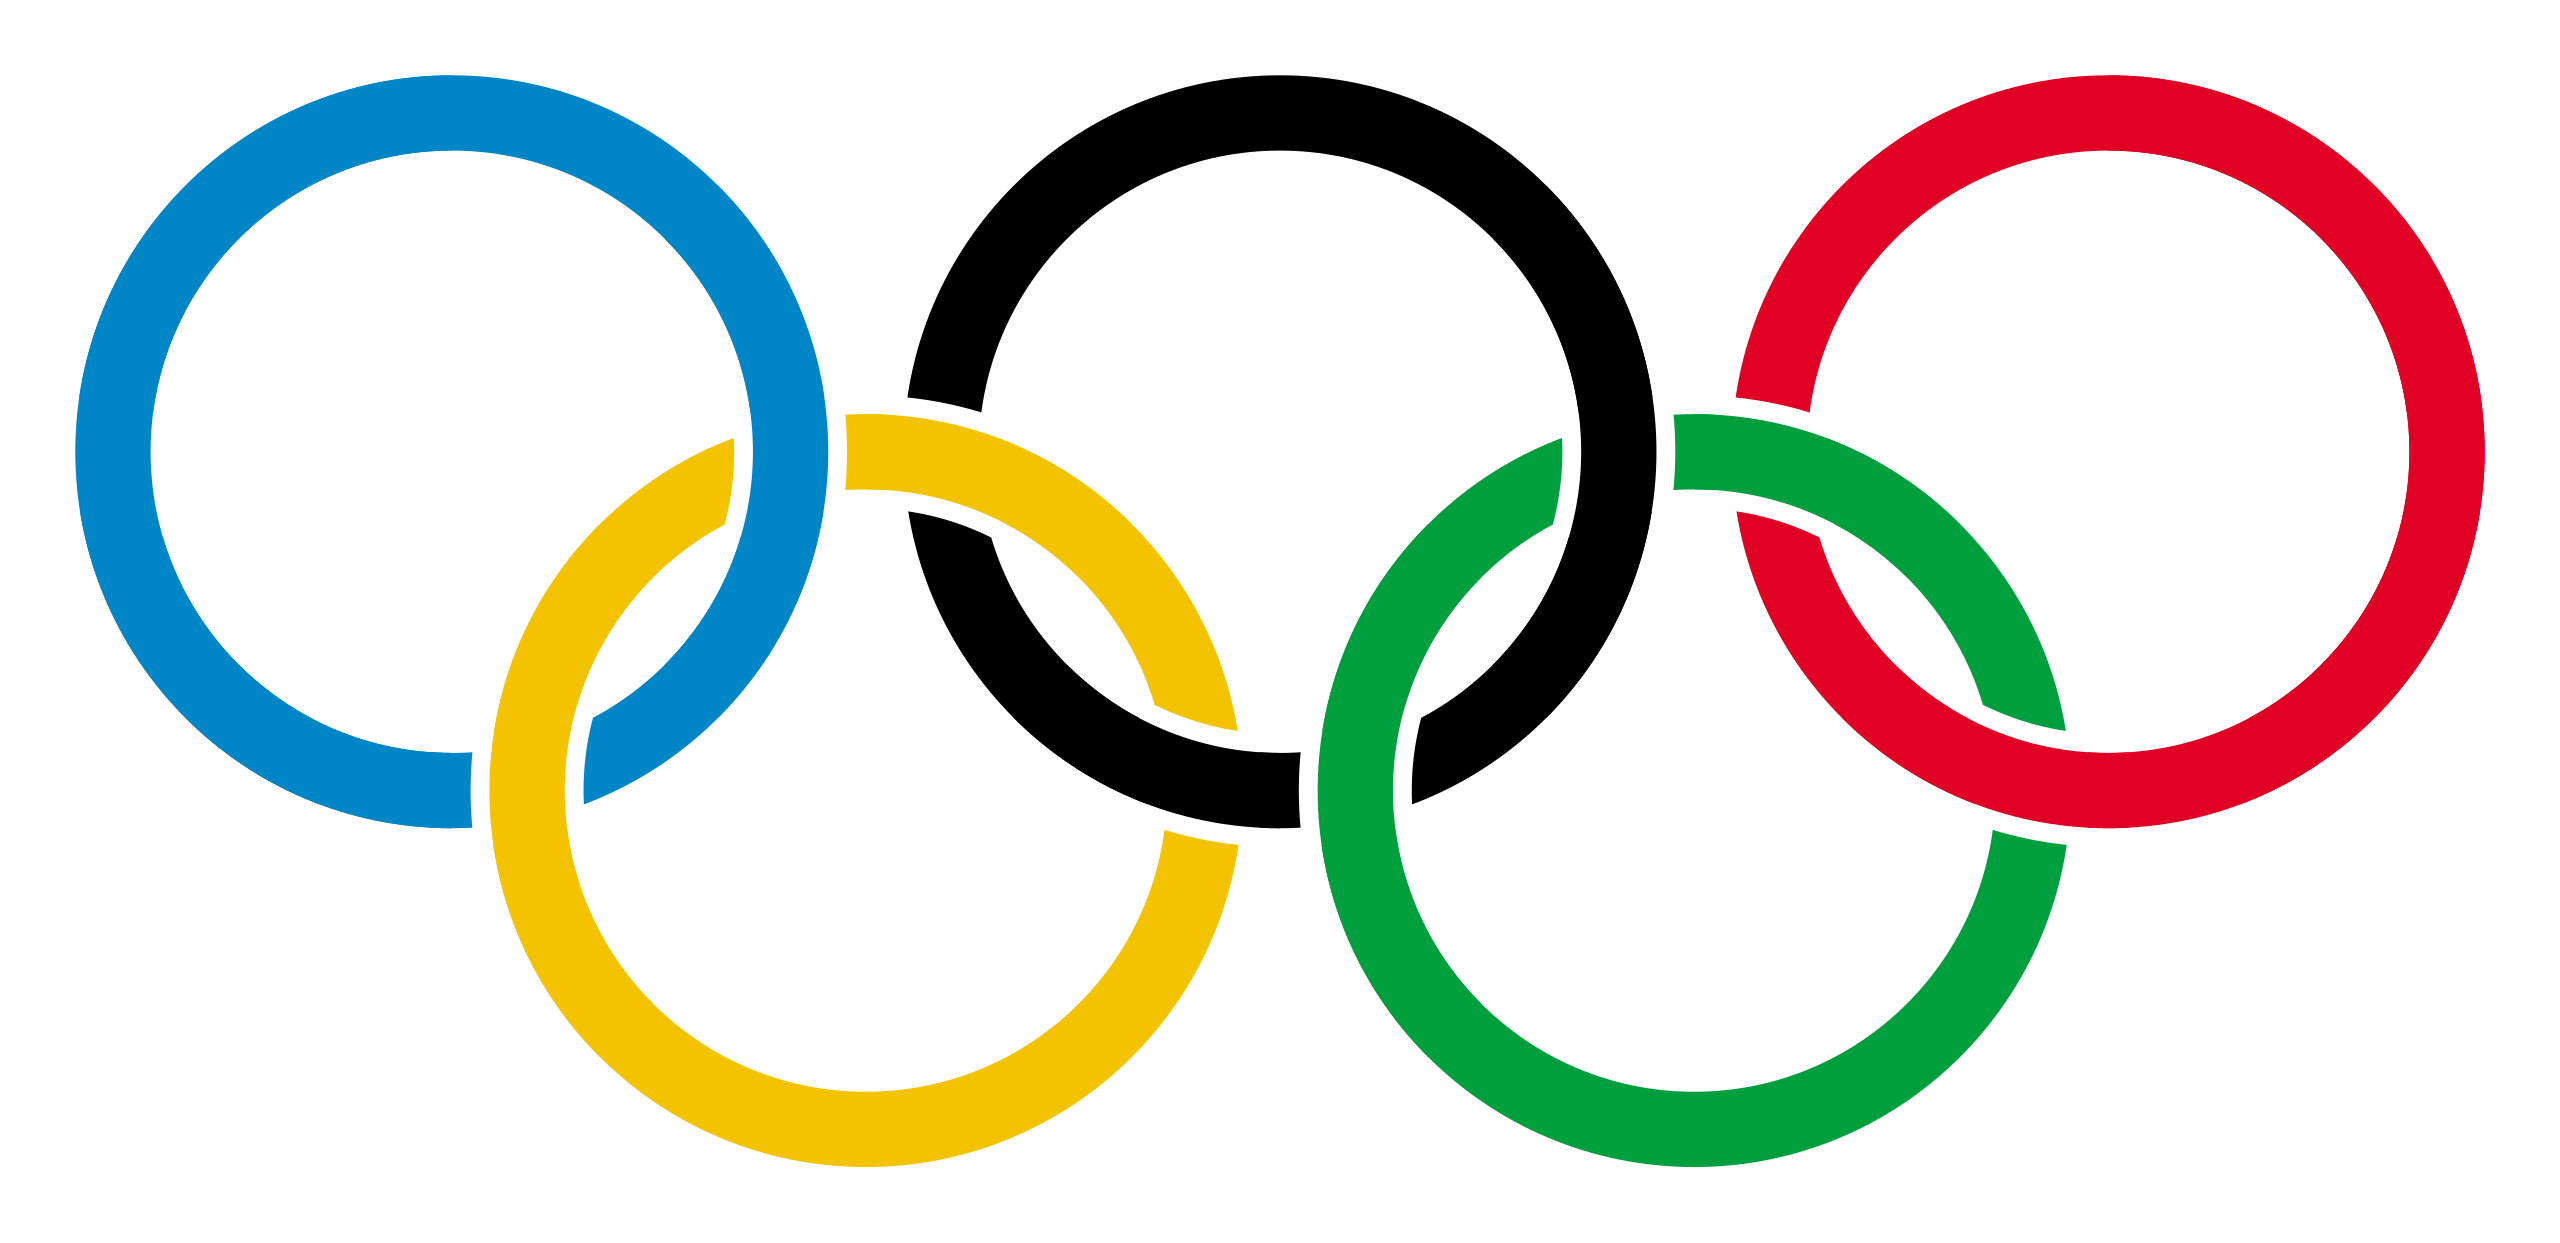 Olympic Rings Transparent PNG - 1410x1411 - Free Download on NicePNG